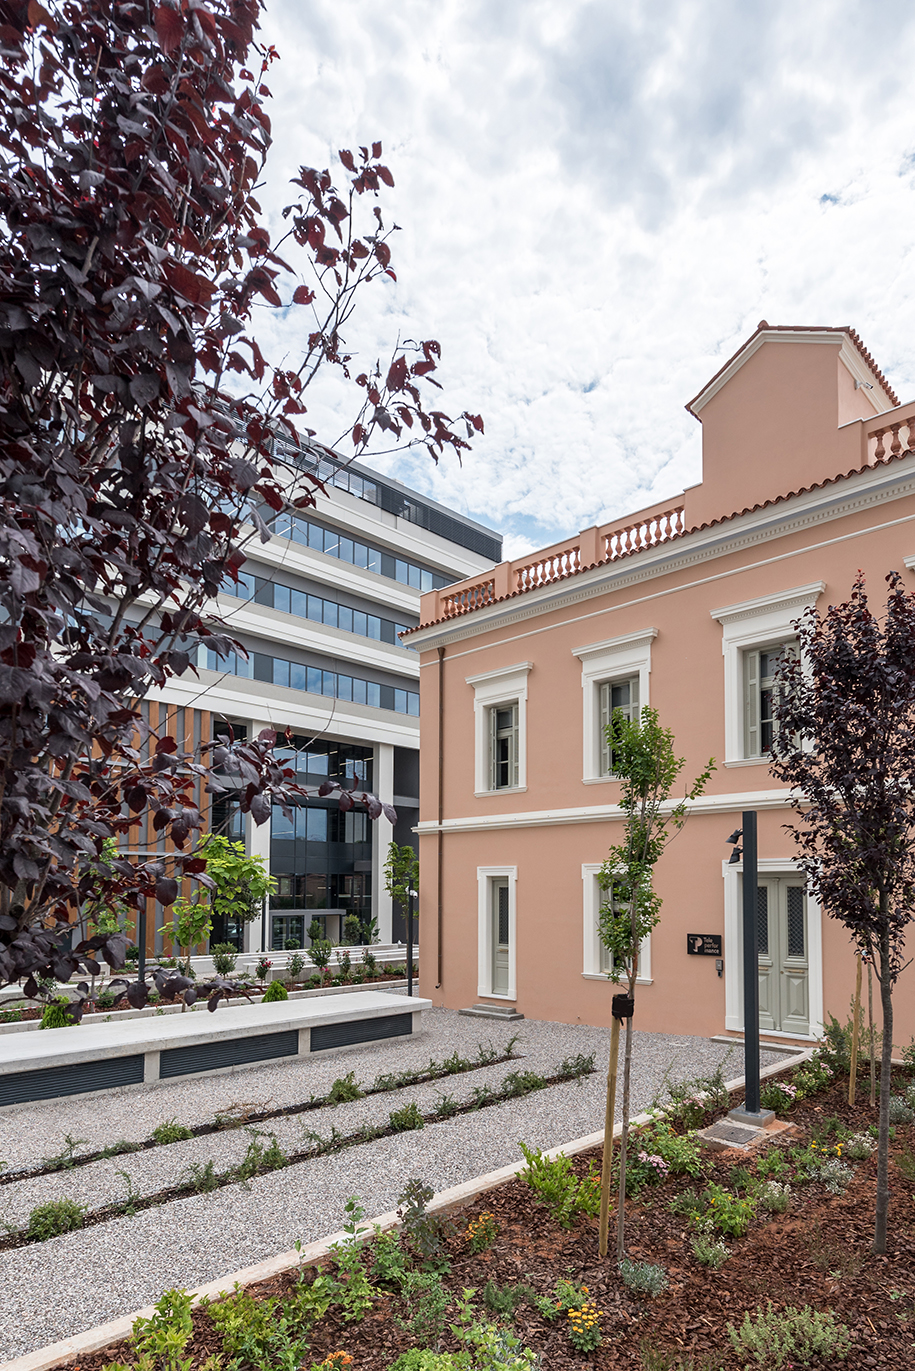 Archisearch PPP2_Building Complex at Piraeus: a state-of-the-art complex of office facilities including the revival of Papastratos tobacco industry| AS.P.A.-URBAN ENVIRONMENTAL REFORMATIONS SA & KN Group